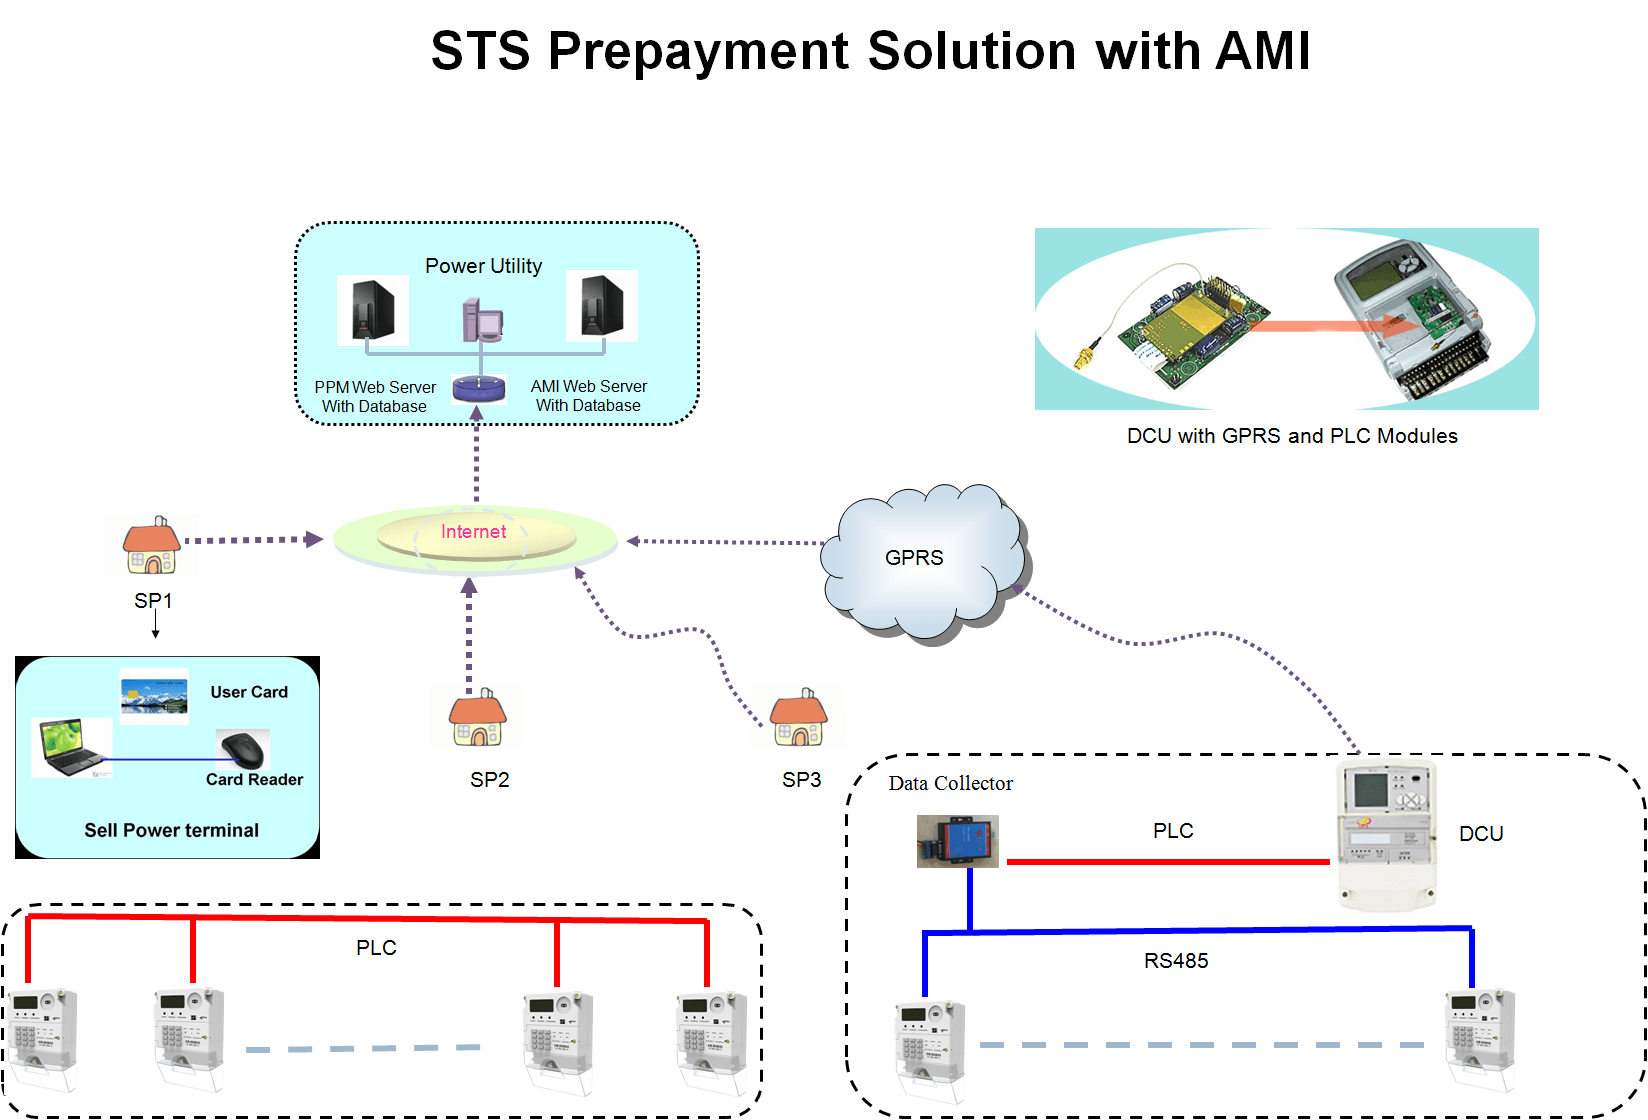 STS Prepayment Vending Solution with AMI